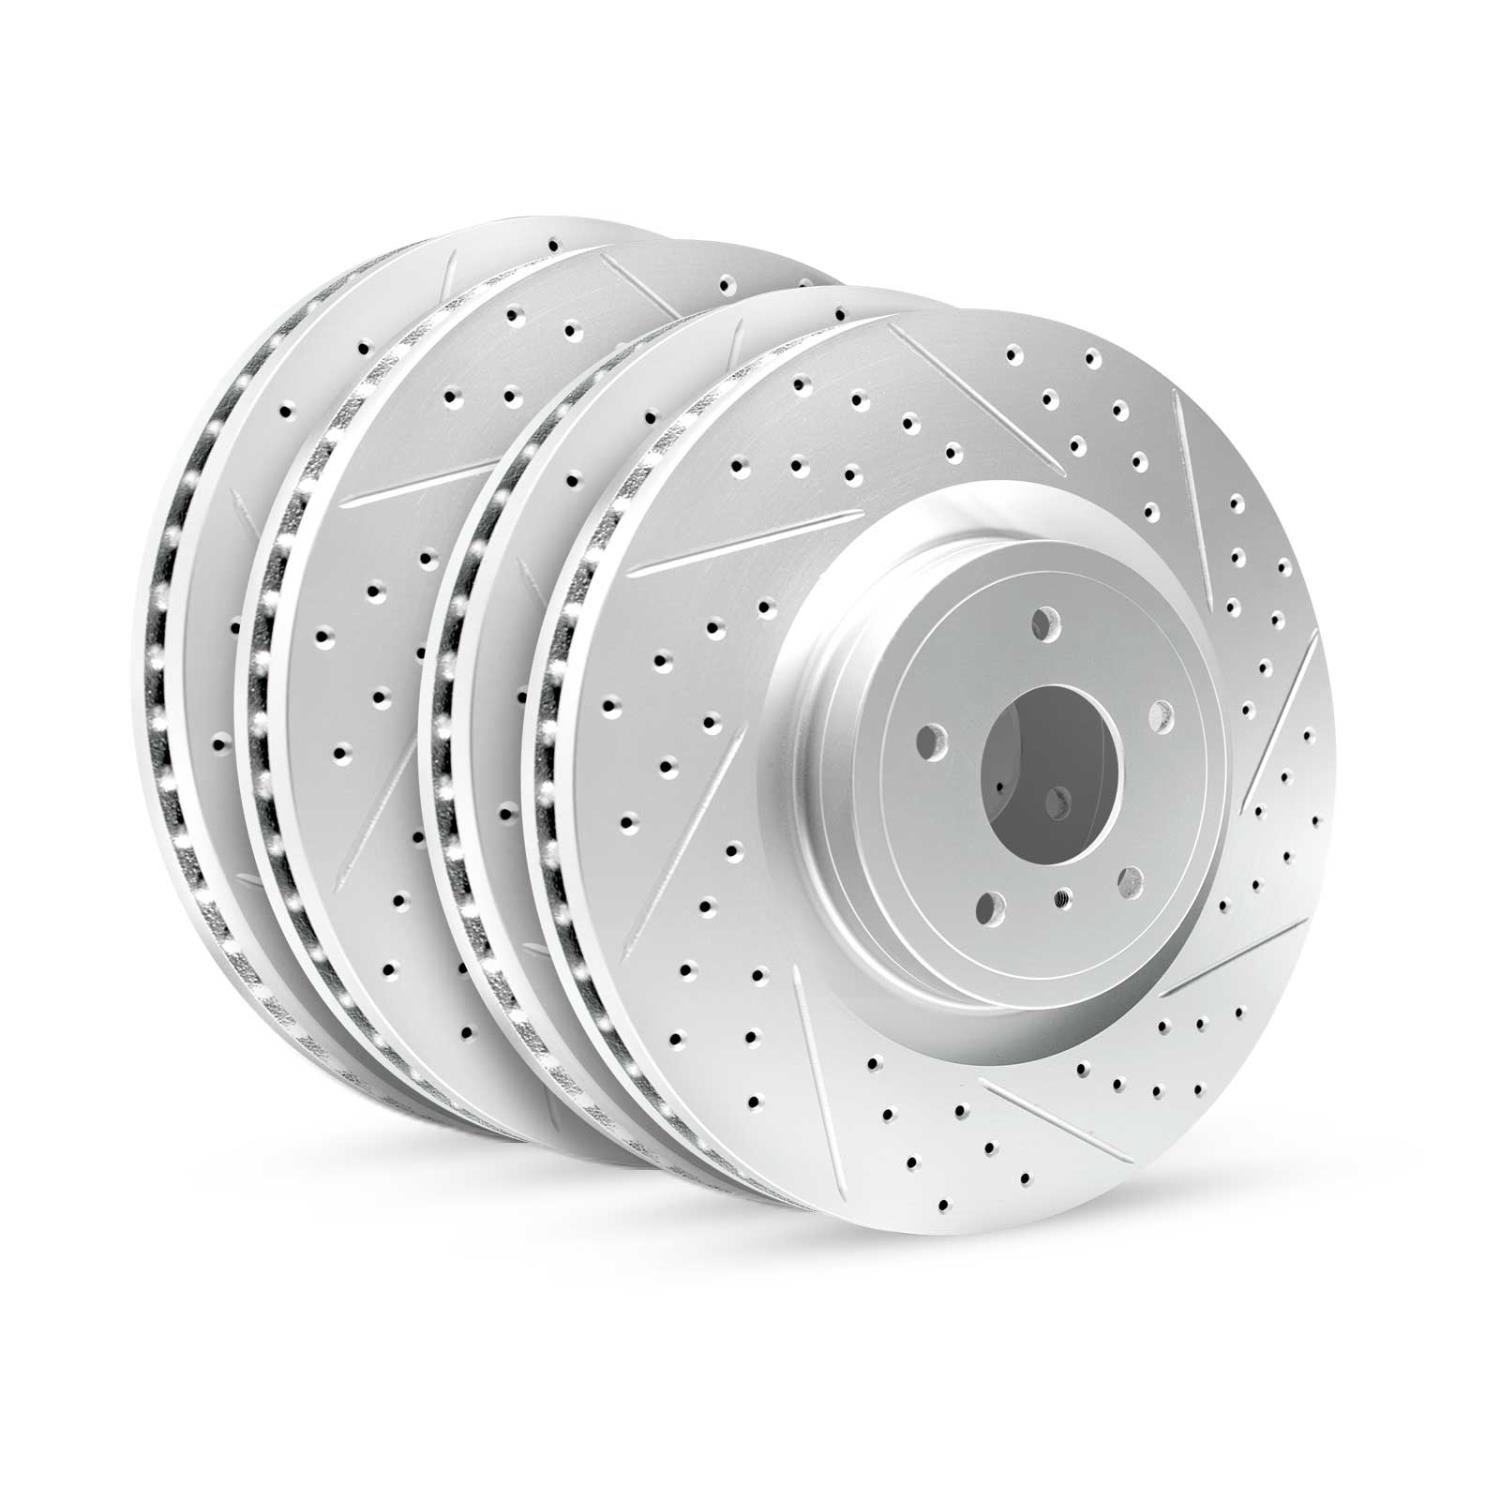 GEO-Carbon Drilled/Slotted Rotors, 2009-2010 Kia/Hyundai/Genesis, Position: Front/Rear